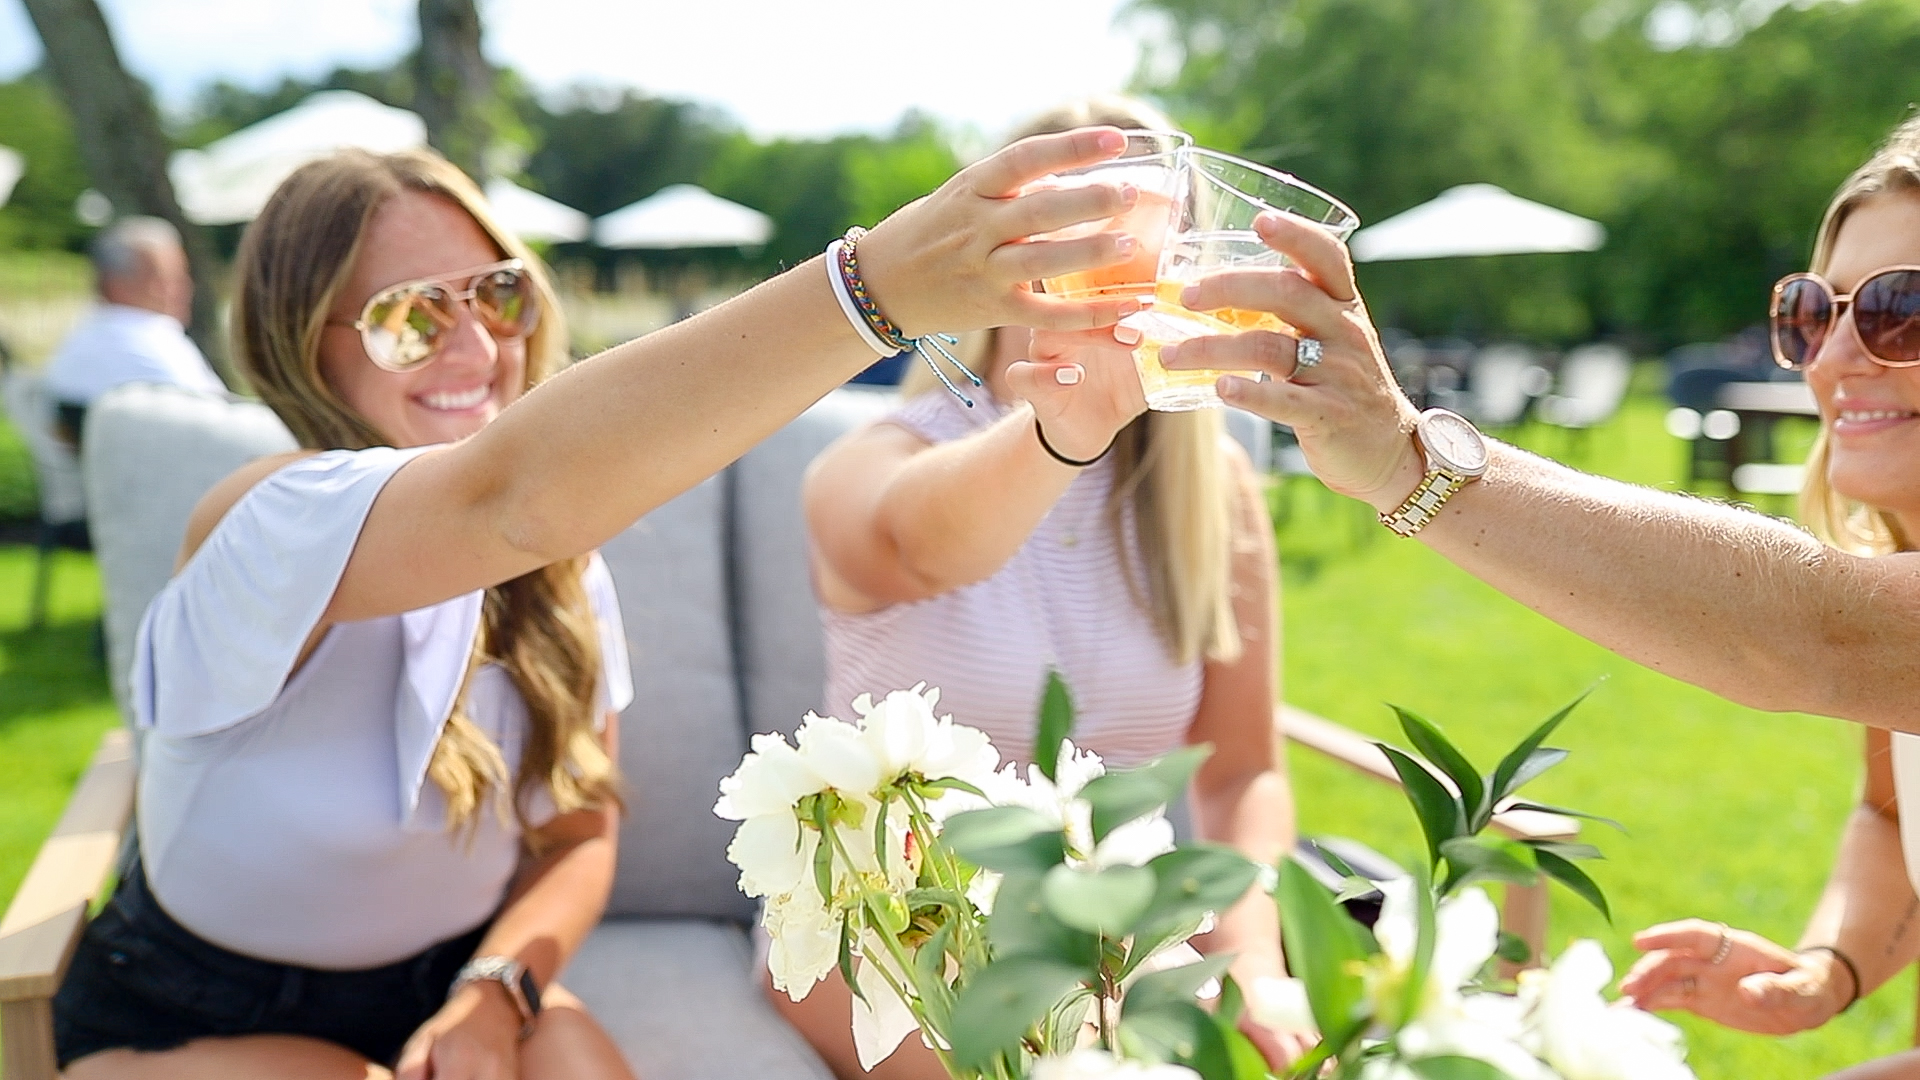 Renault winery is a fun New Jersey bachelorette party spot.